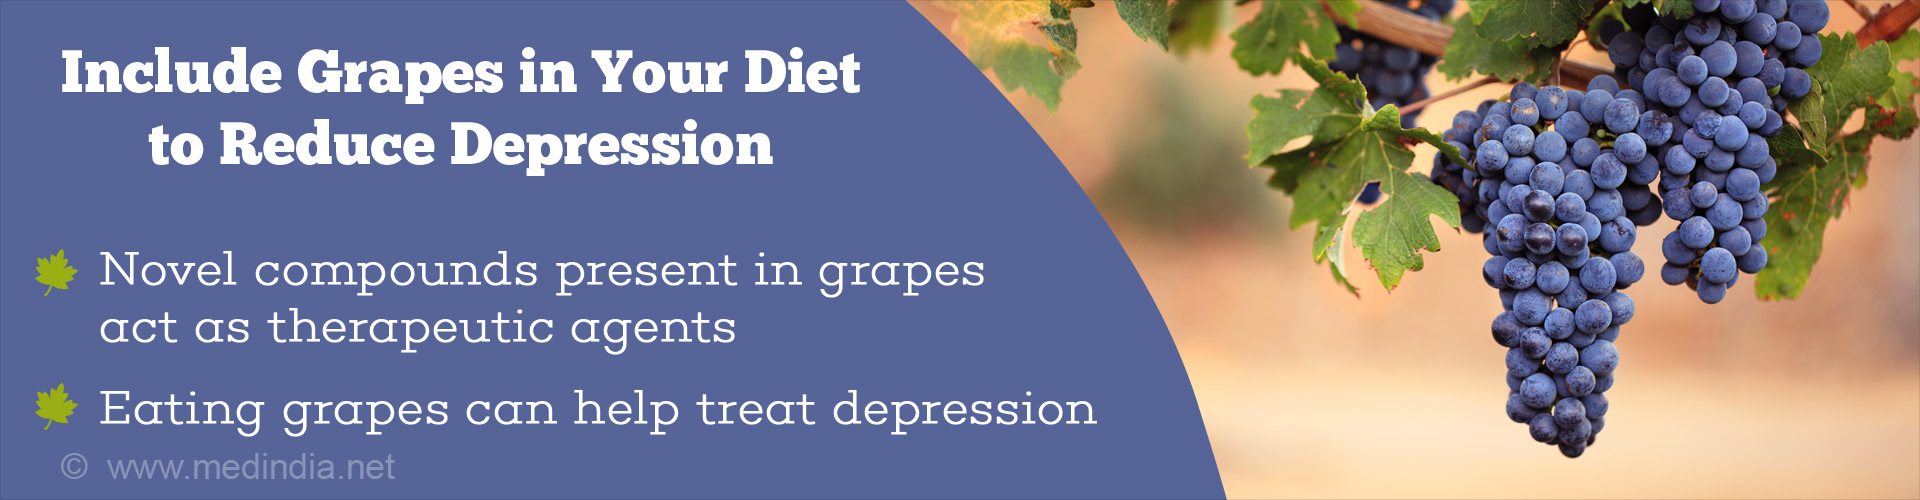 include grapes in your diet to reduce depression
- novel compounds present in grapes act as therapeutic agents
- eating grapes can help treat depression
